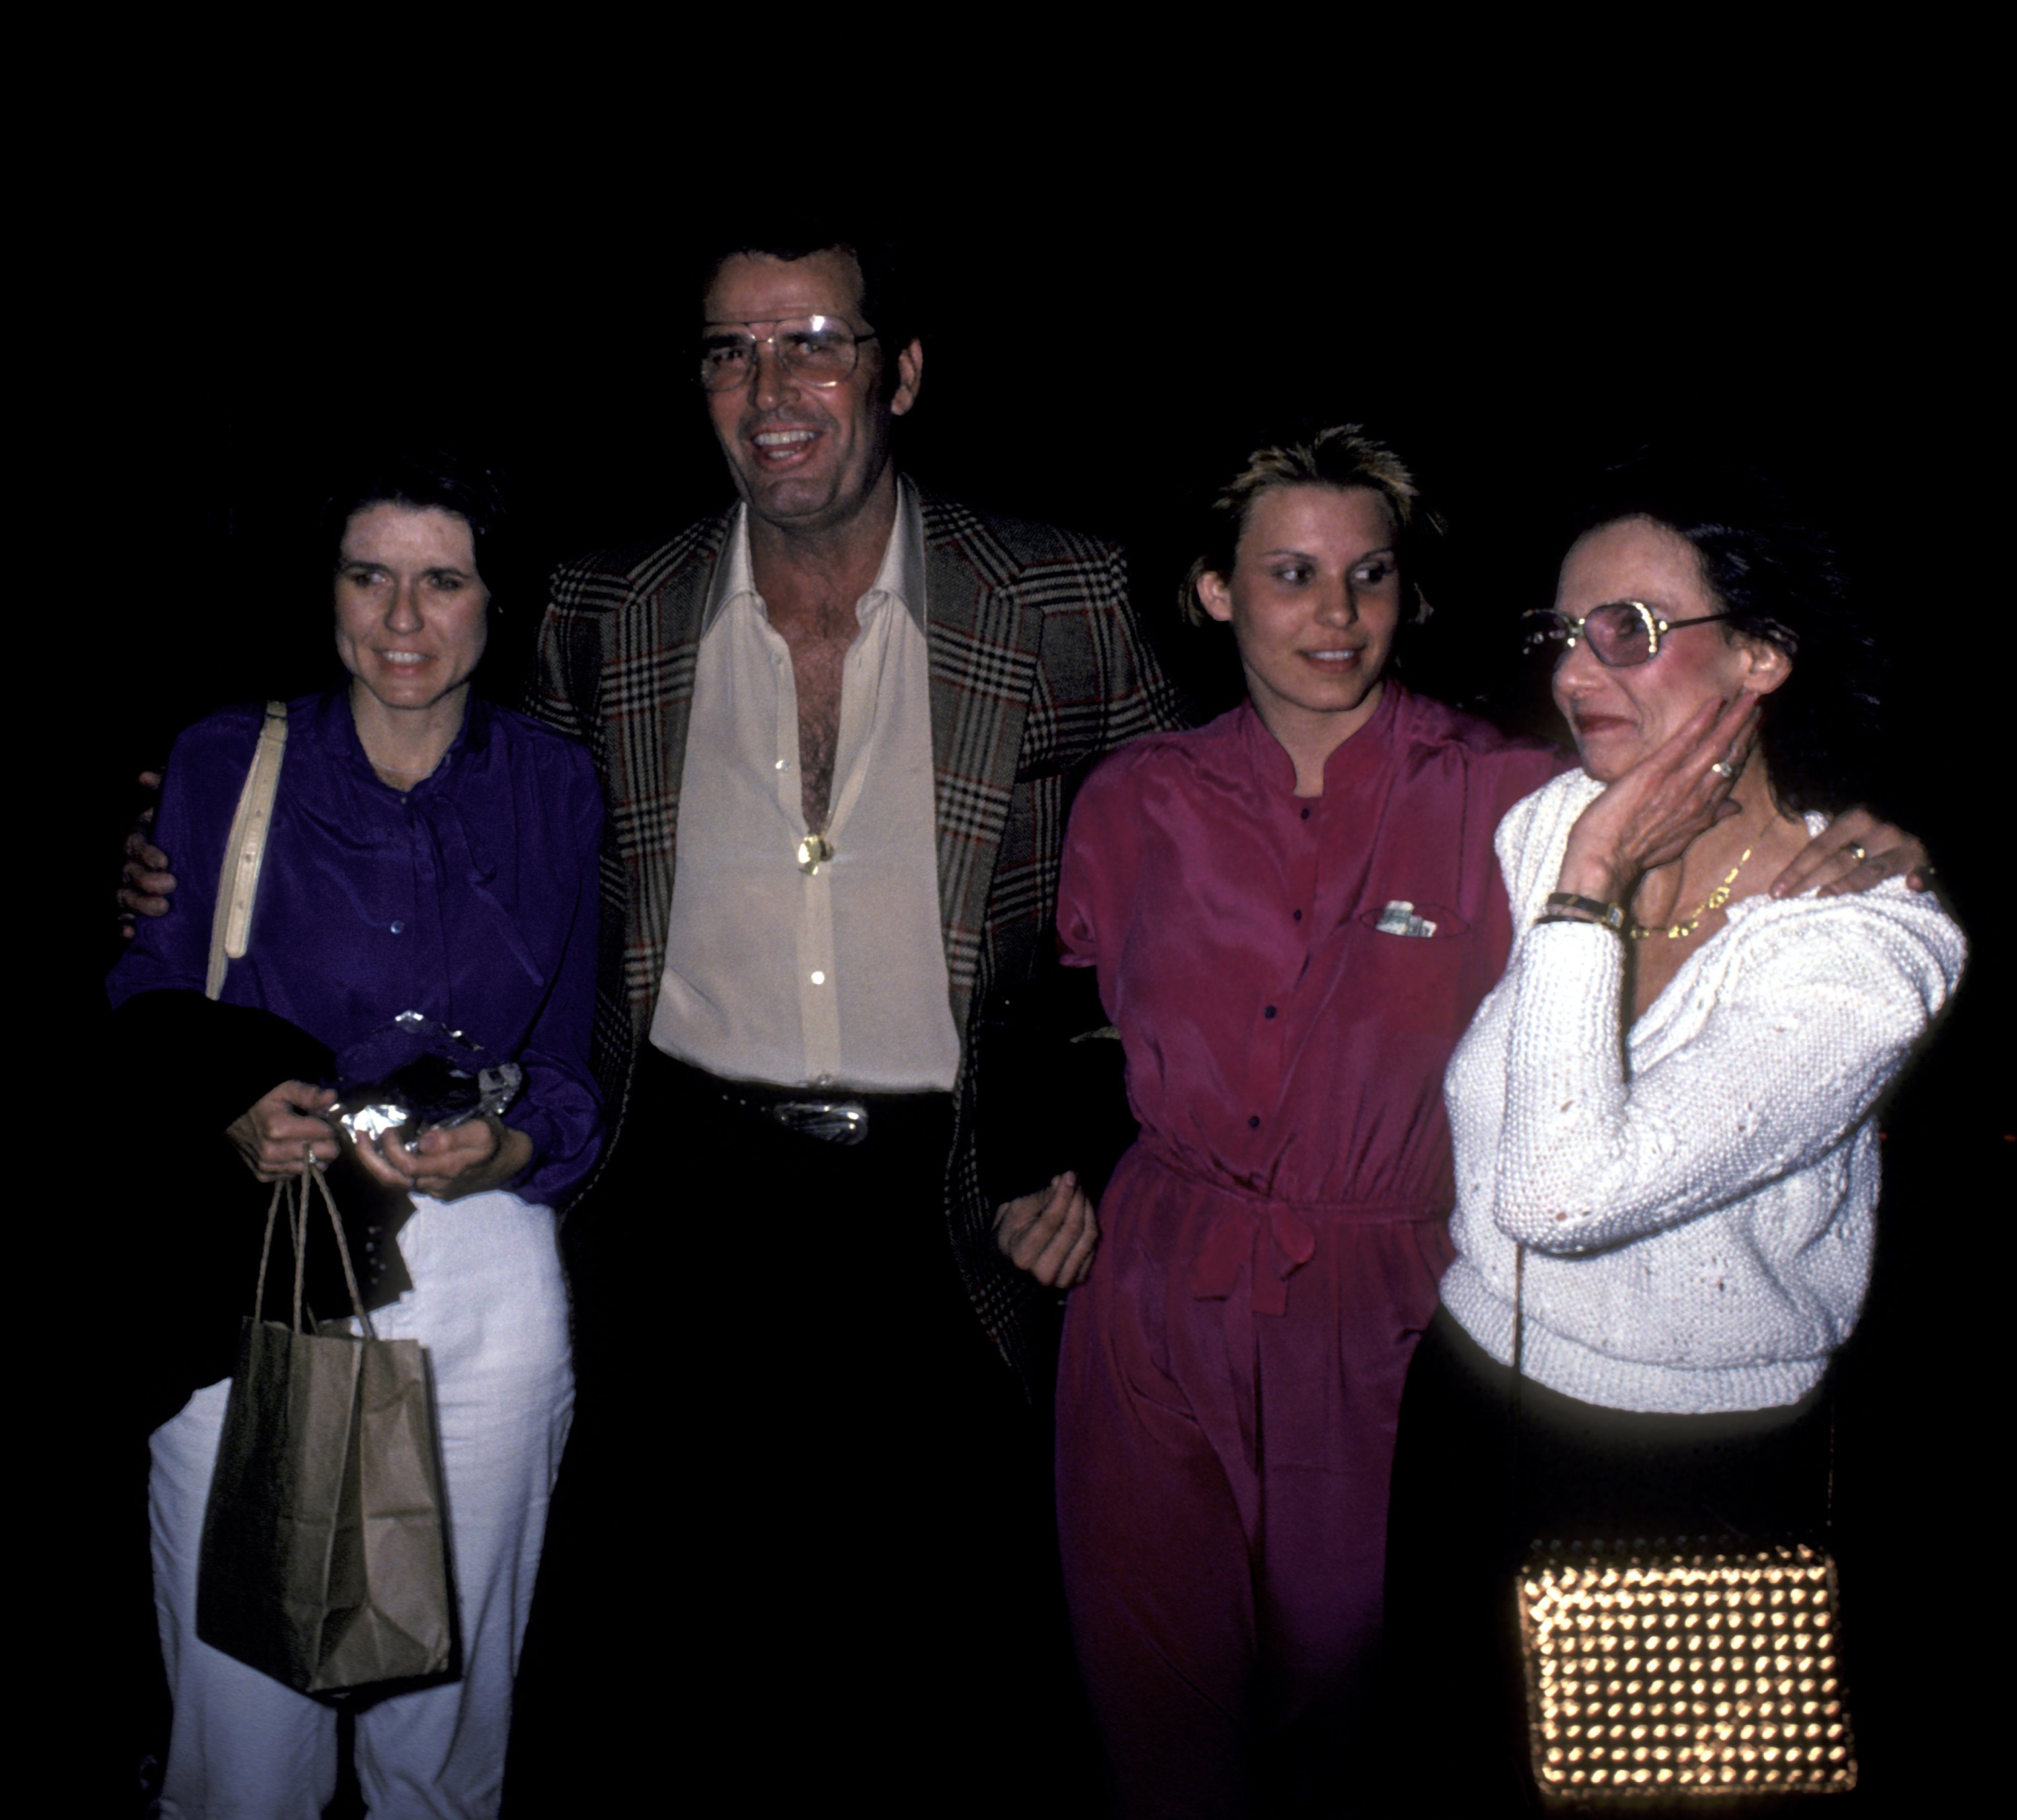 James Garner, his wife Lois Garner, and daughters Kimberly Garner and Greta Garner sighted on April 7, 1980, at Le Dome Restaurant in West Hollywood, California. | Source: Getty Images